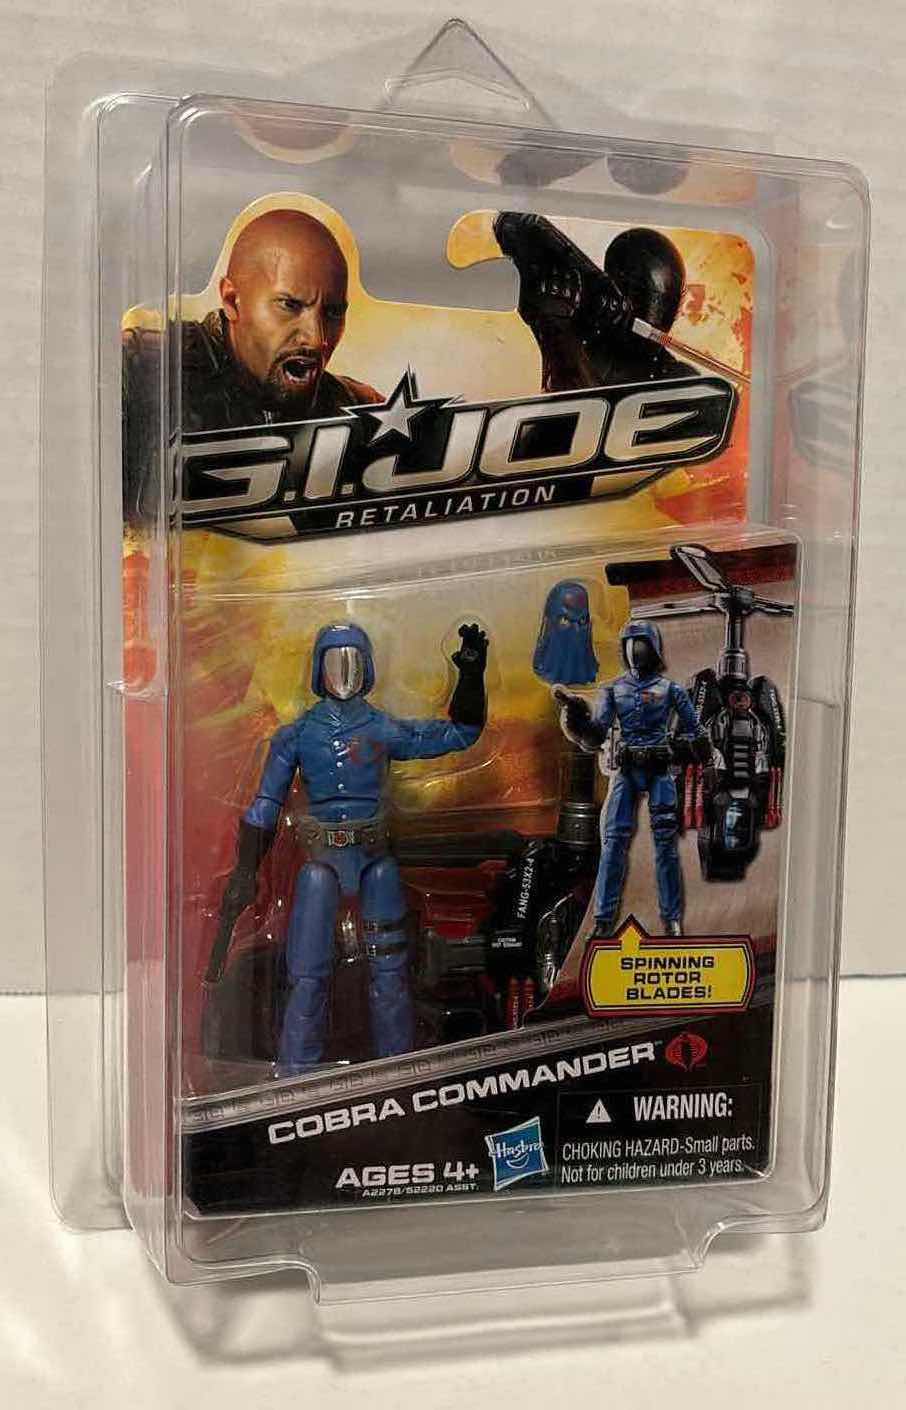 Photo 1 of NEW HASBRO G.I. JOE RETALIATION ACTION FIGURE & ACCESSORIES “COBRA COMMANDER” IN PROTECTIVE CLEAR CLAMSHELL CASE